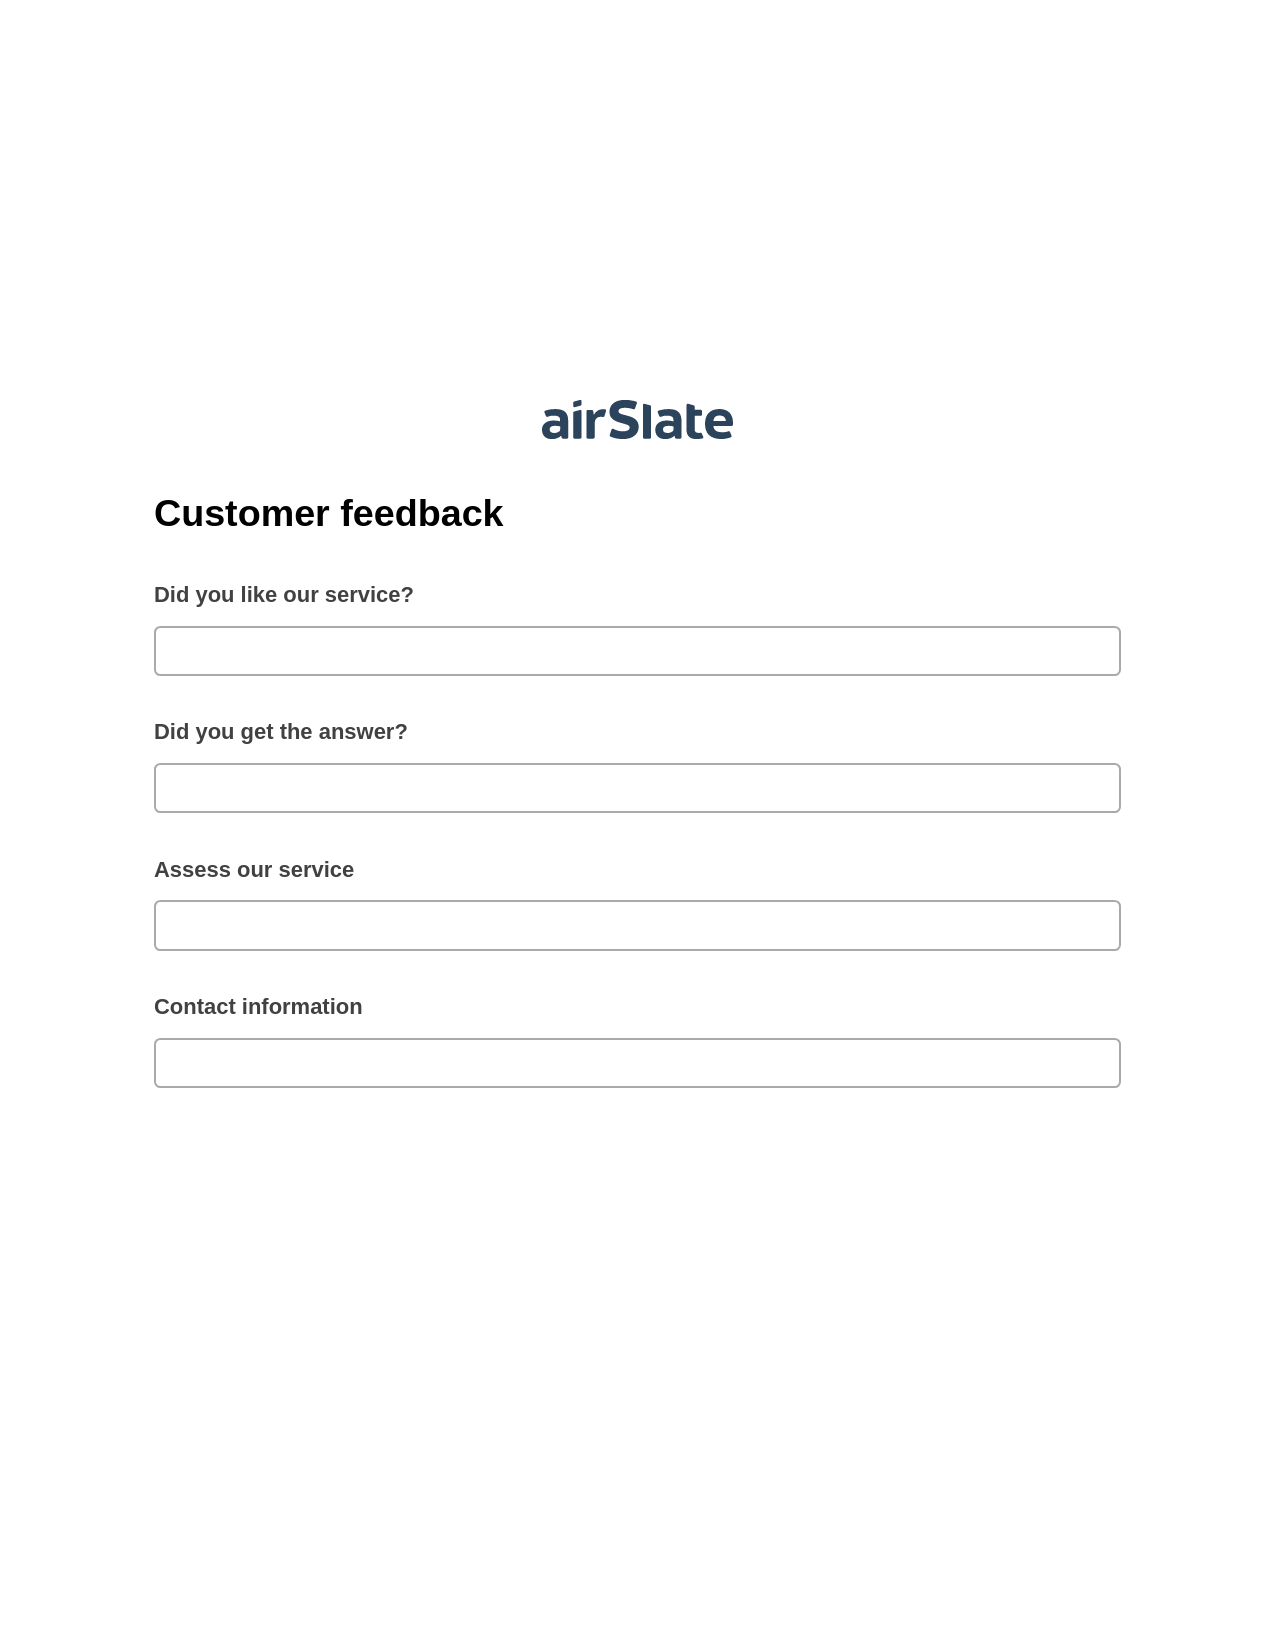 Customer feedback Prefill from NetSuite records, Remove Slate Bot, Archive to Box Bot